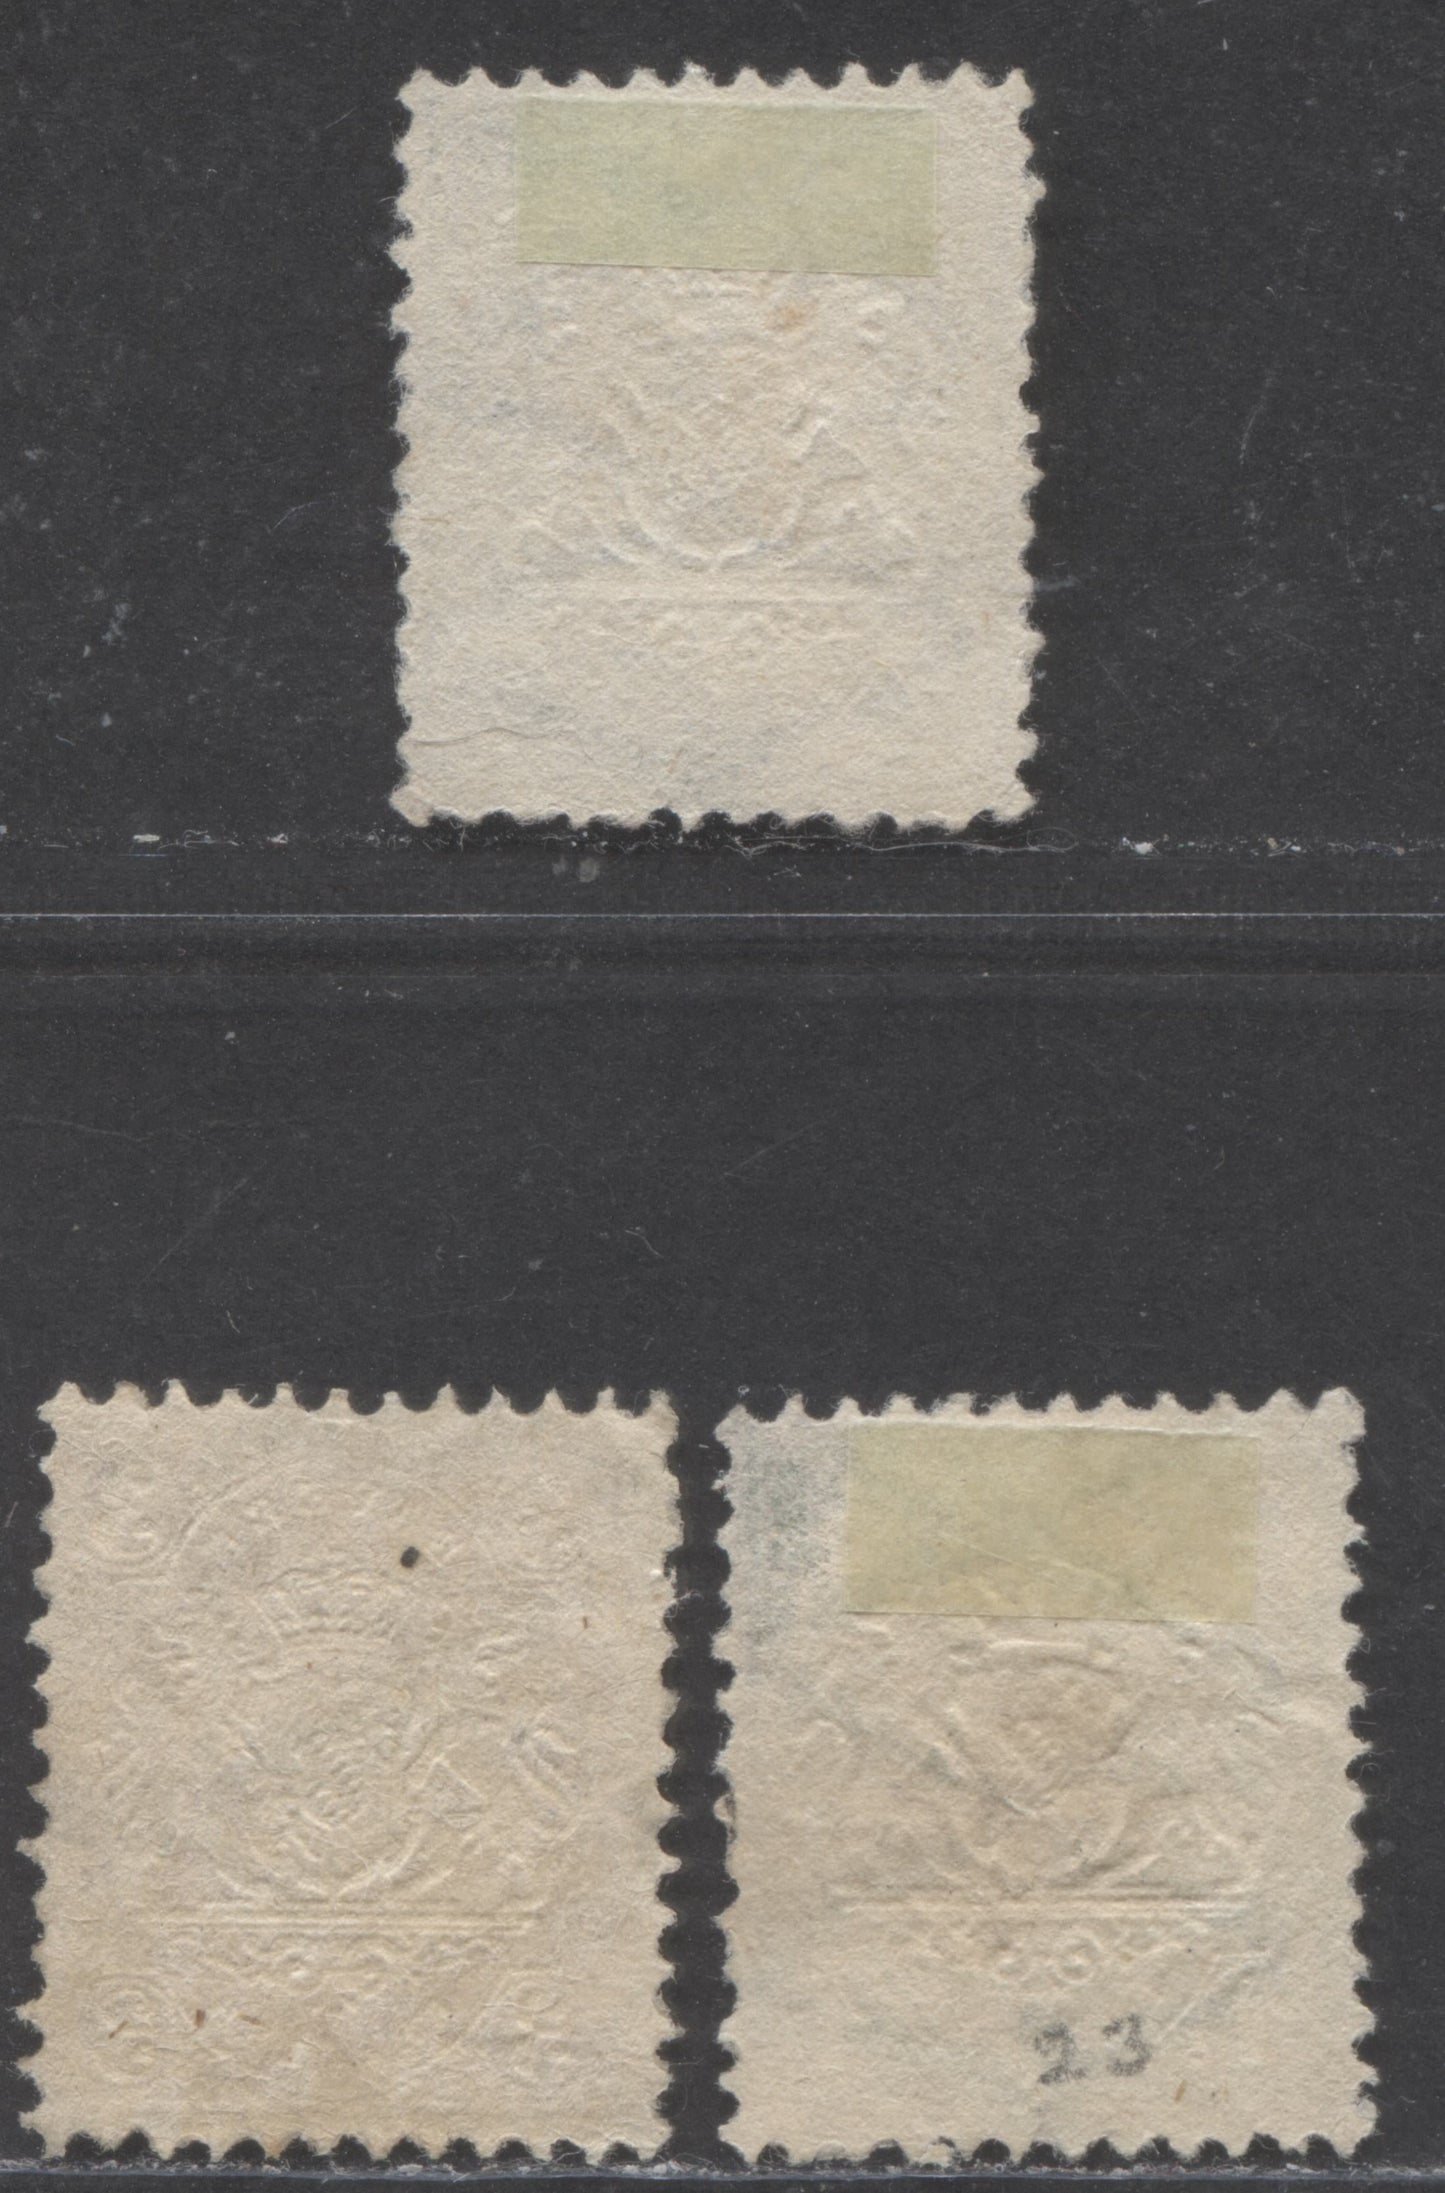 Lot 82 Germany - Bavaria Mi#22Ya (23)/25Yb (26) 1870-1872 Arms Issue, 17mm, Perf 11.5, Diamond Wmk, 3 Fine/Very Fine Used Singles, Click on Listing to See ALL Pictures, Estimated Value $10